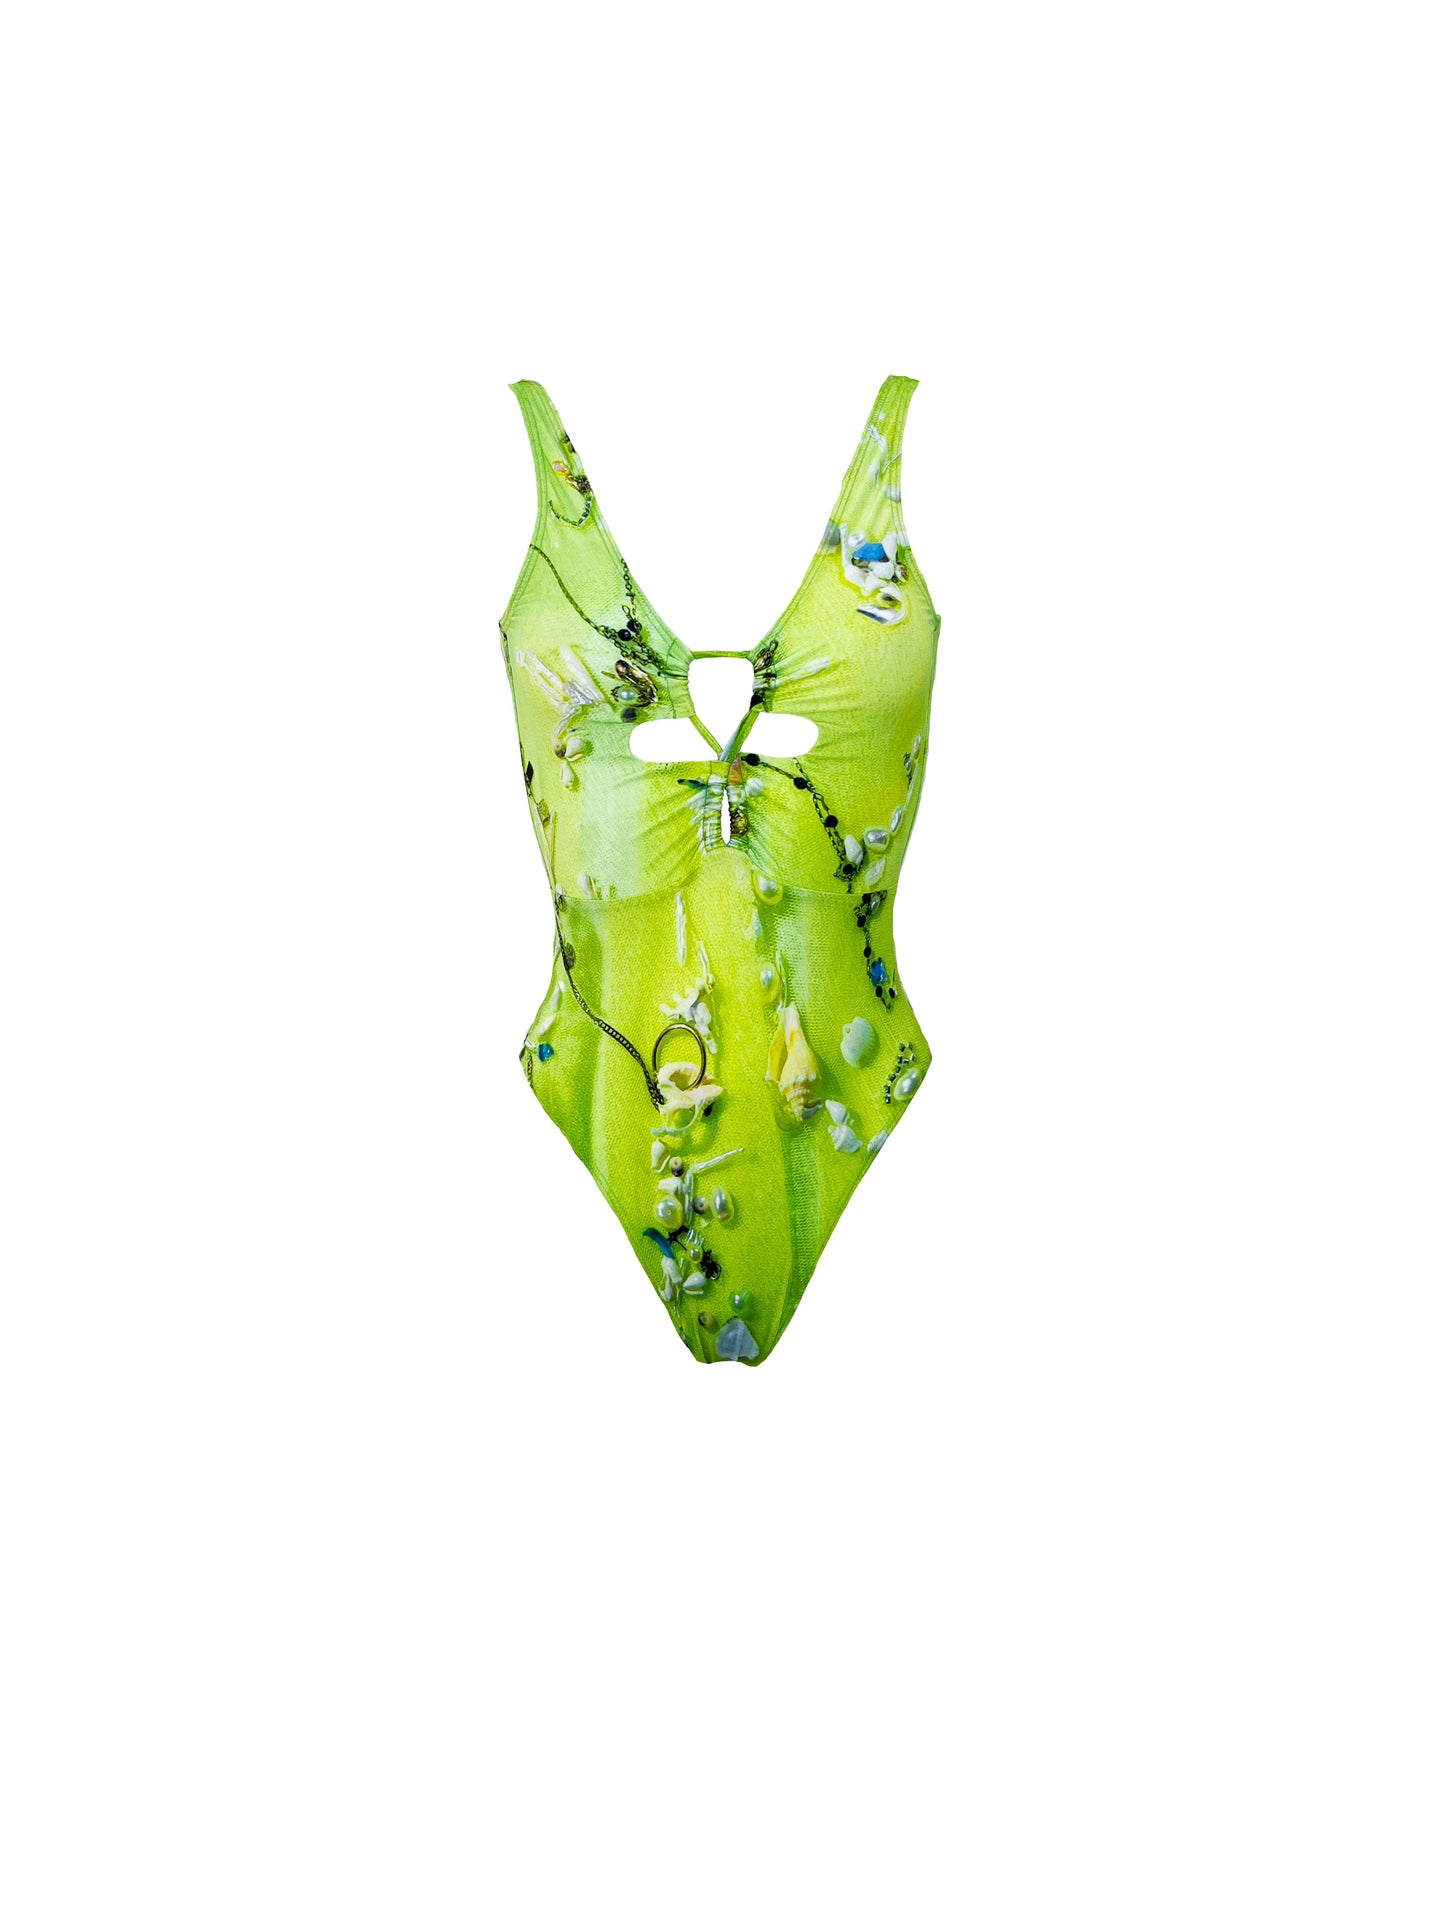 The Neon Pearl Swimsuit